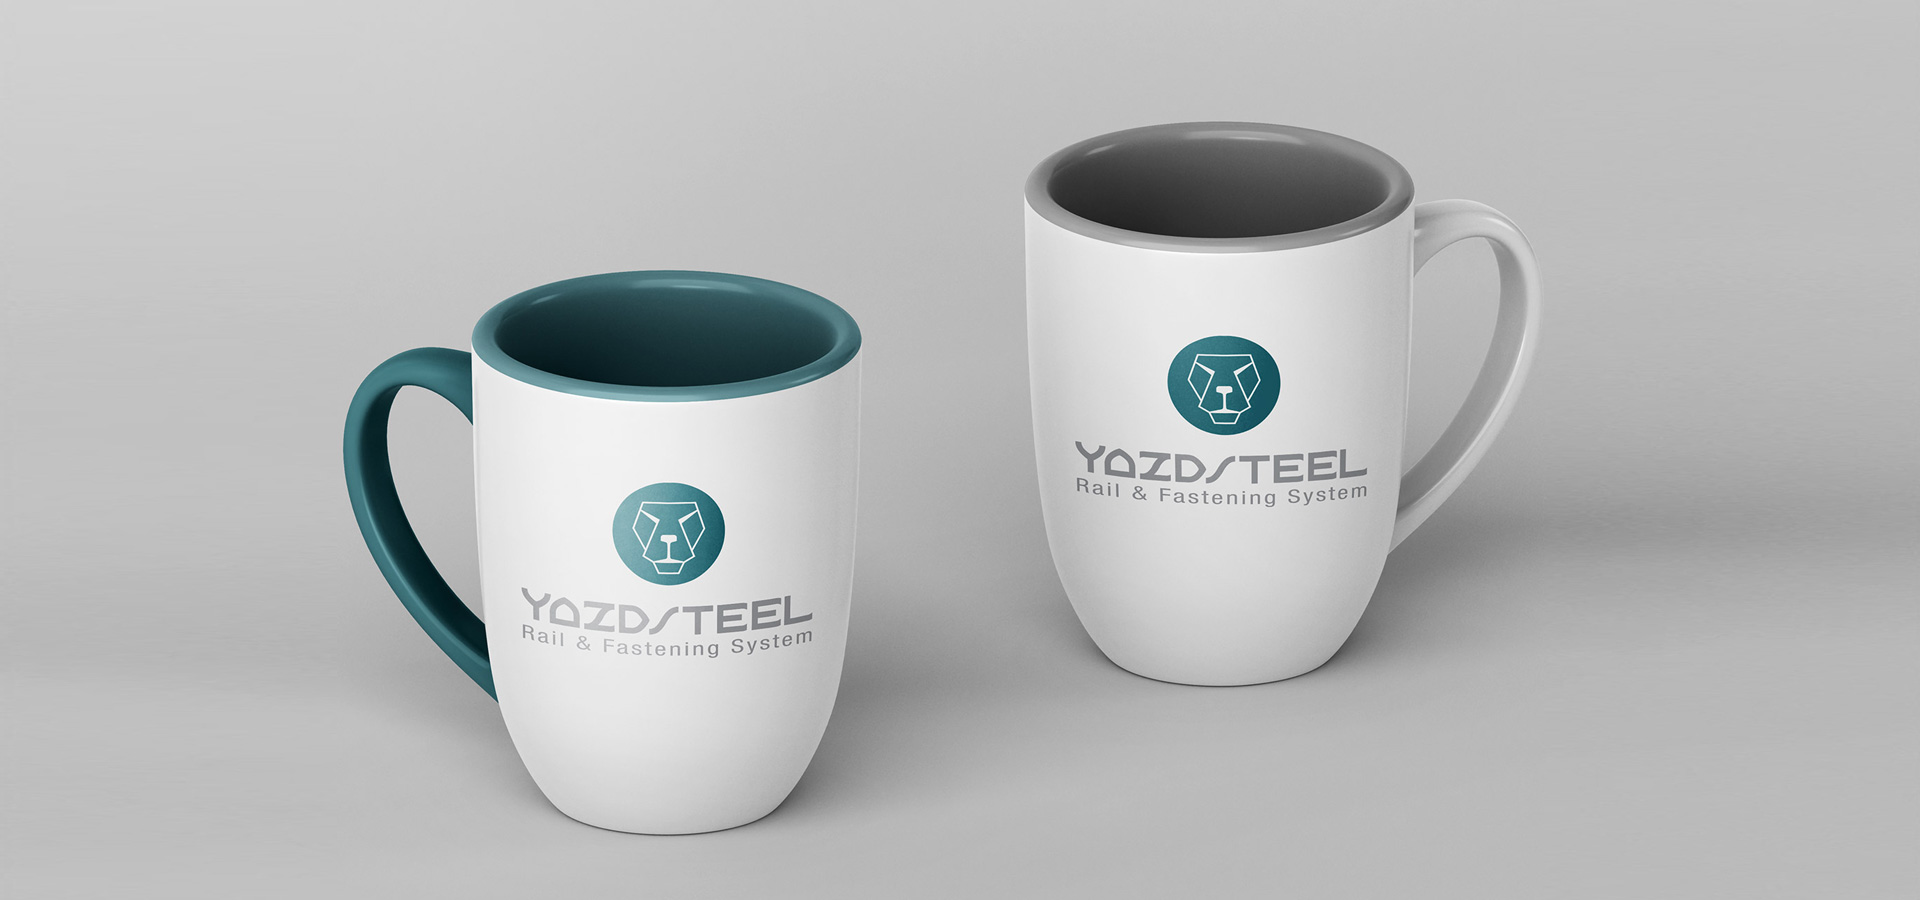 A mug designed for the brand of Yazd Steel as a part of unified Corporate Identity design.